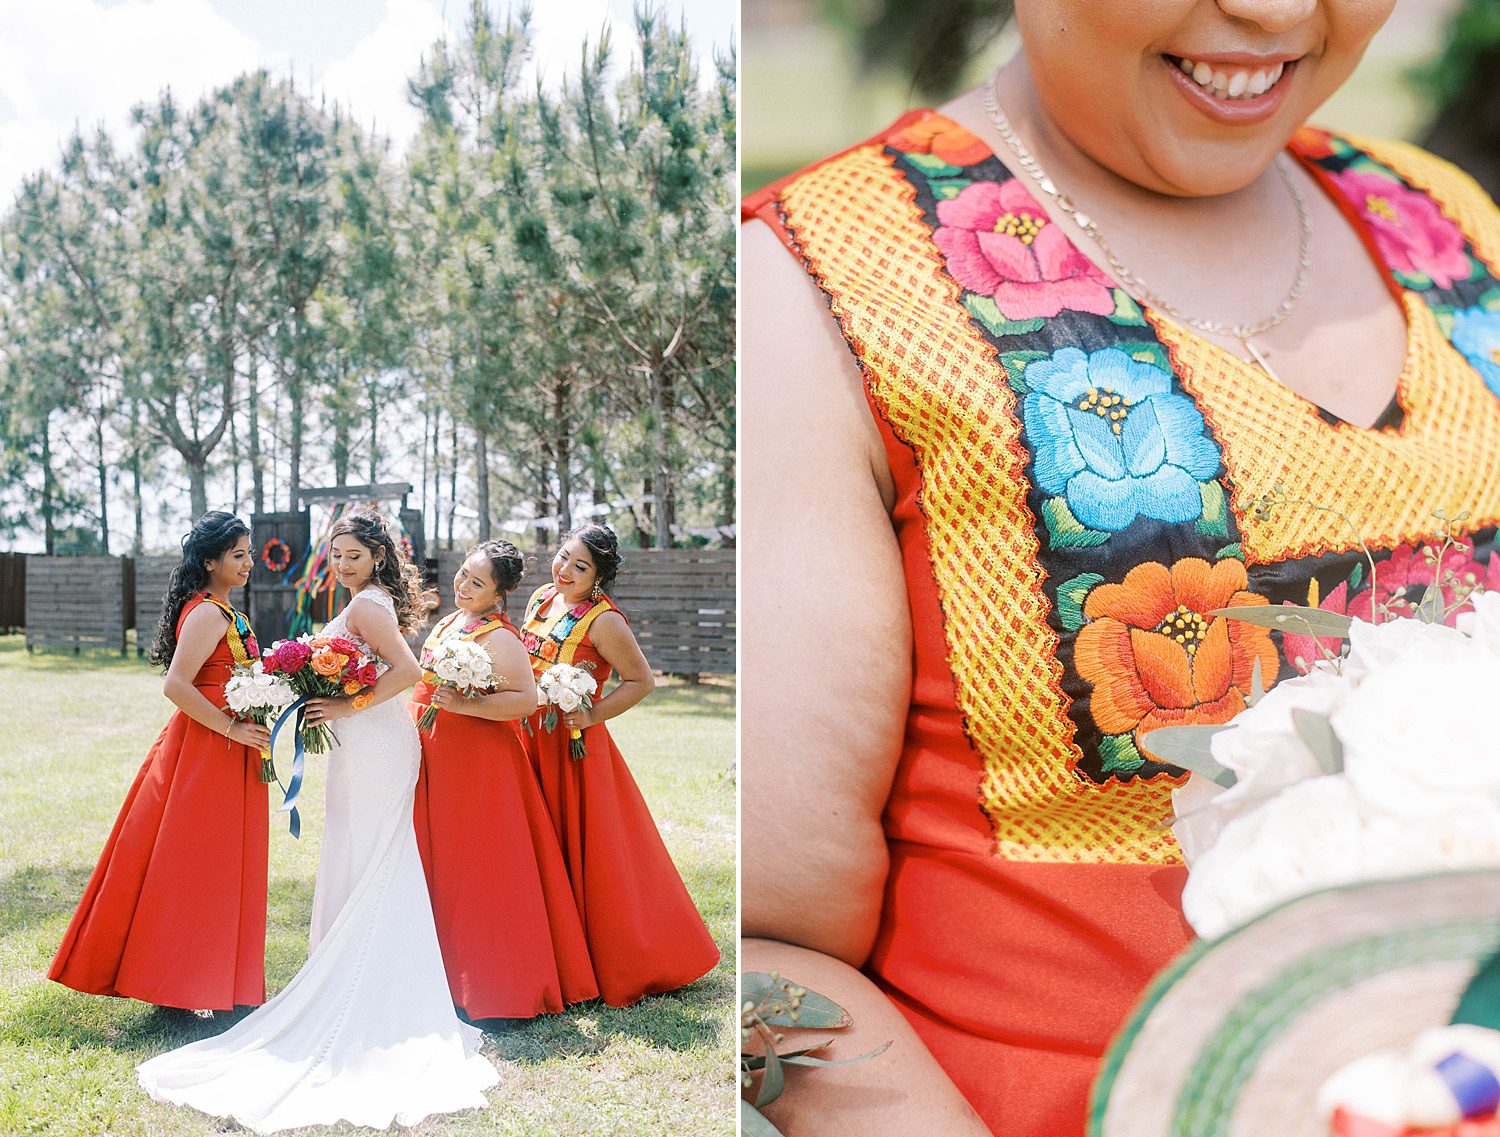 bridesmaids in colorful orange dresses from Mexico smile at bride